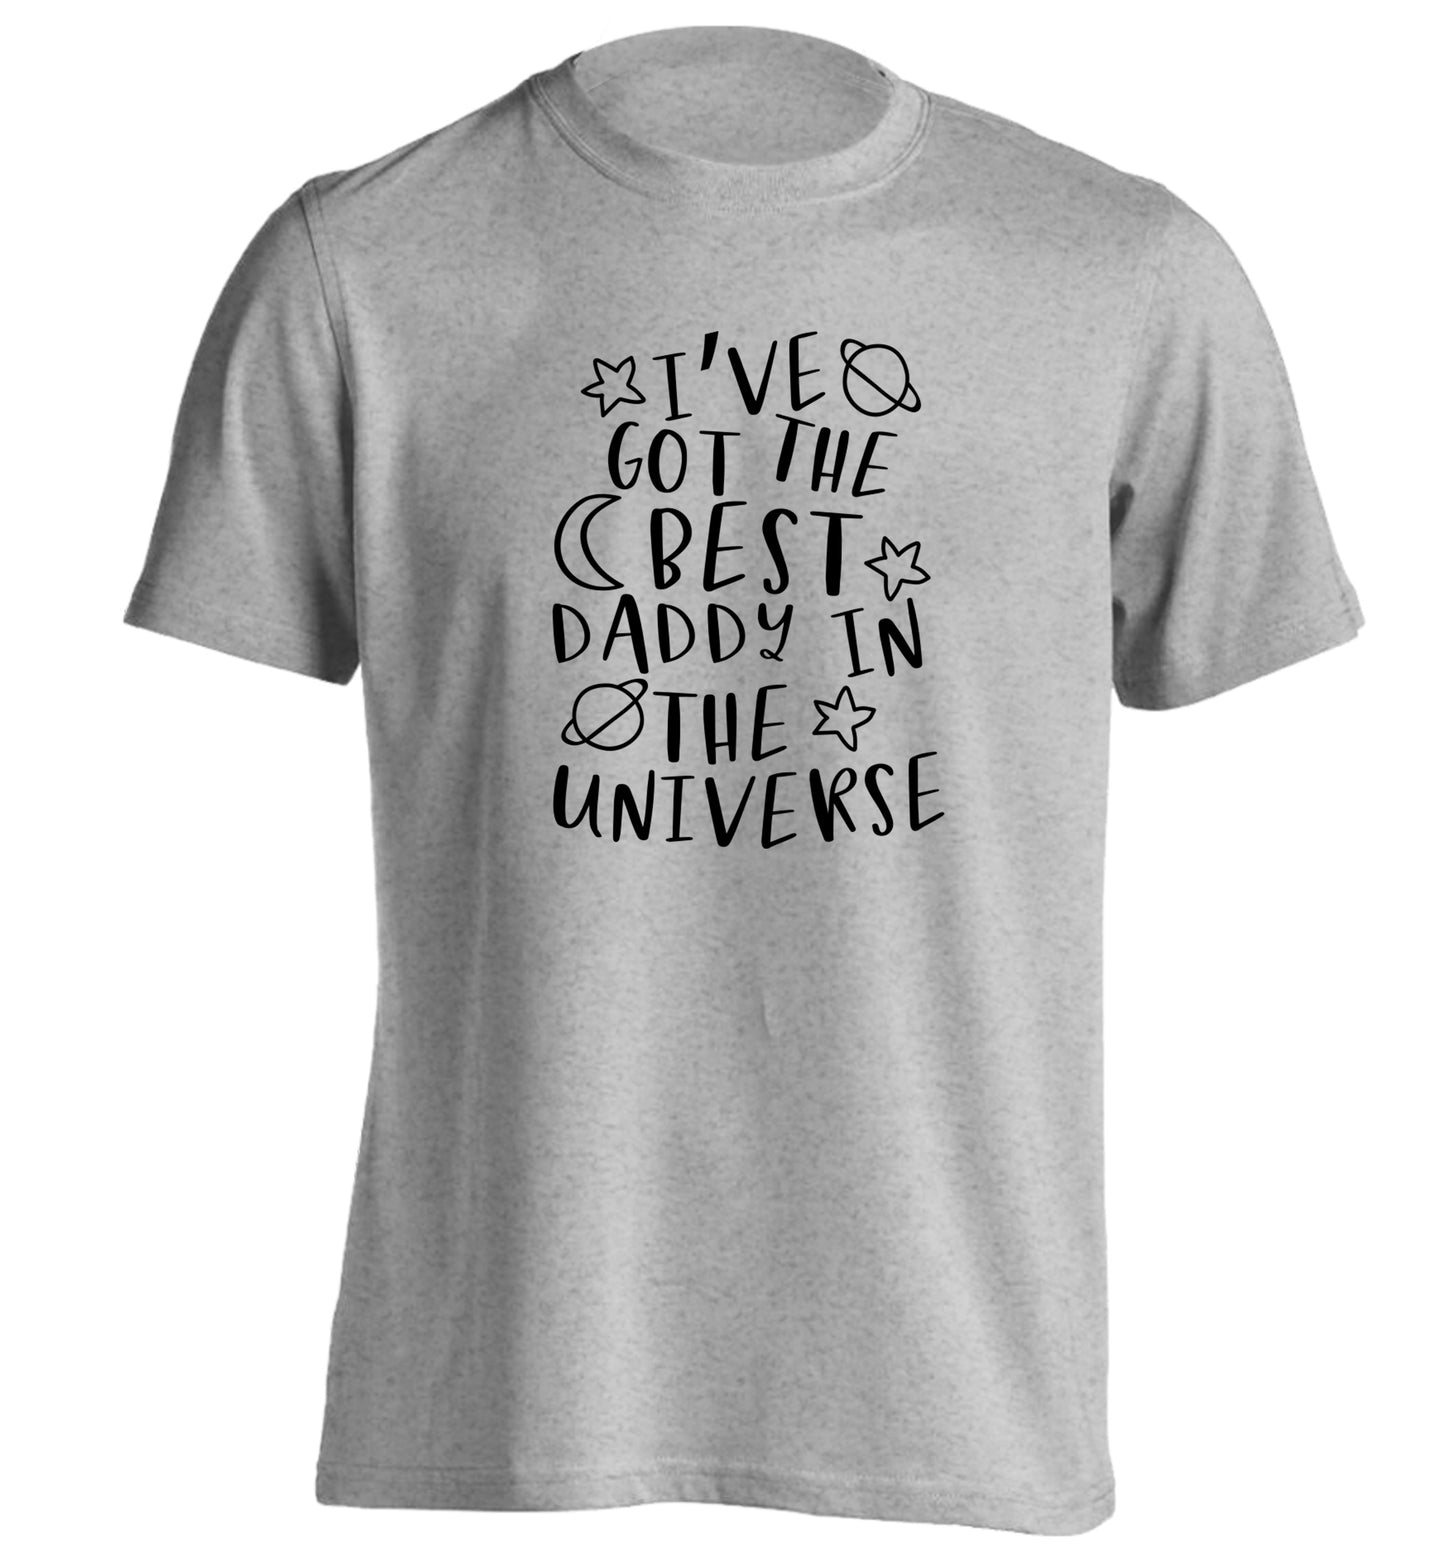 I've got the best daddy in the universe adults unisex grey Tshirt 2XL